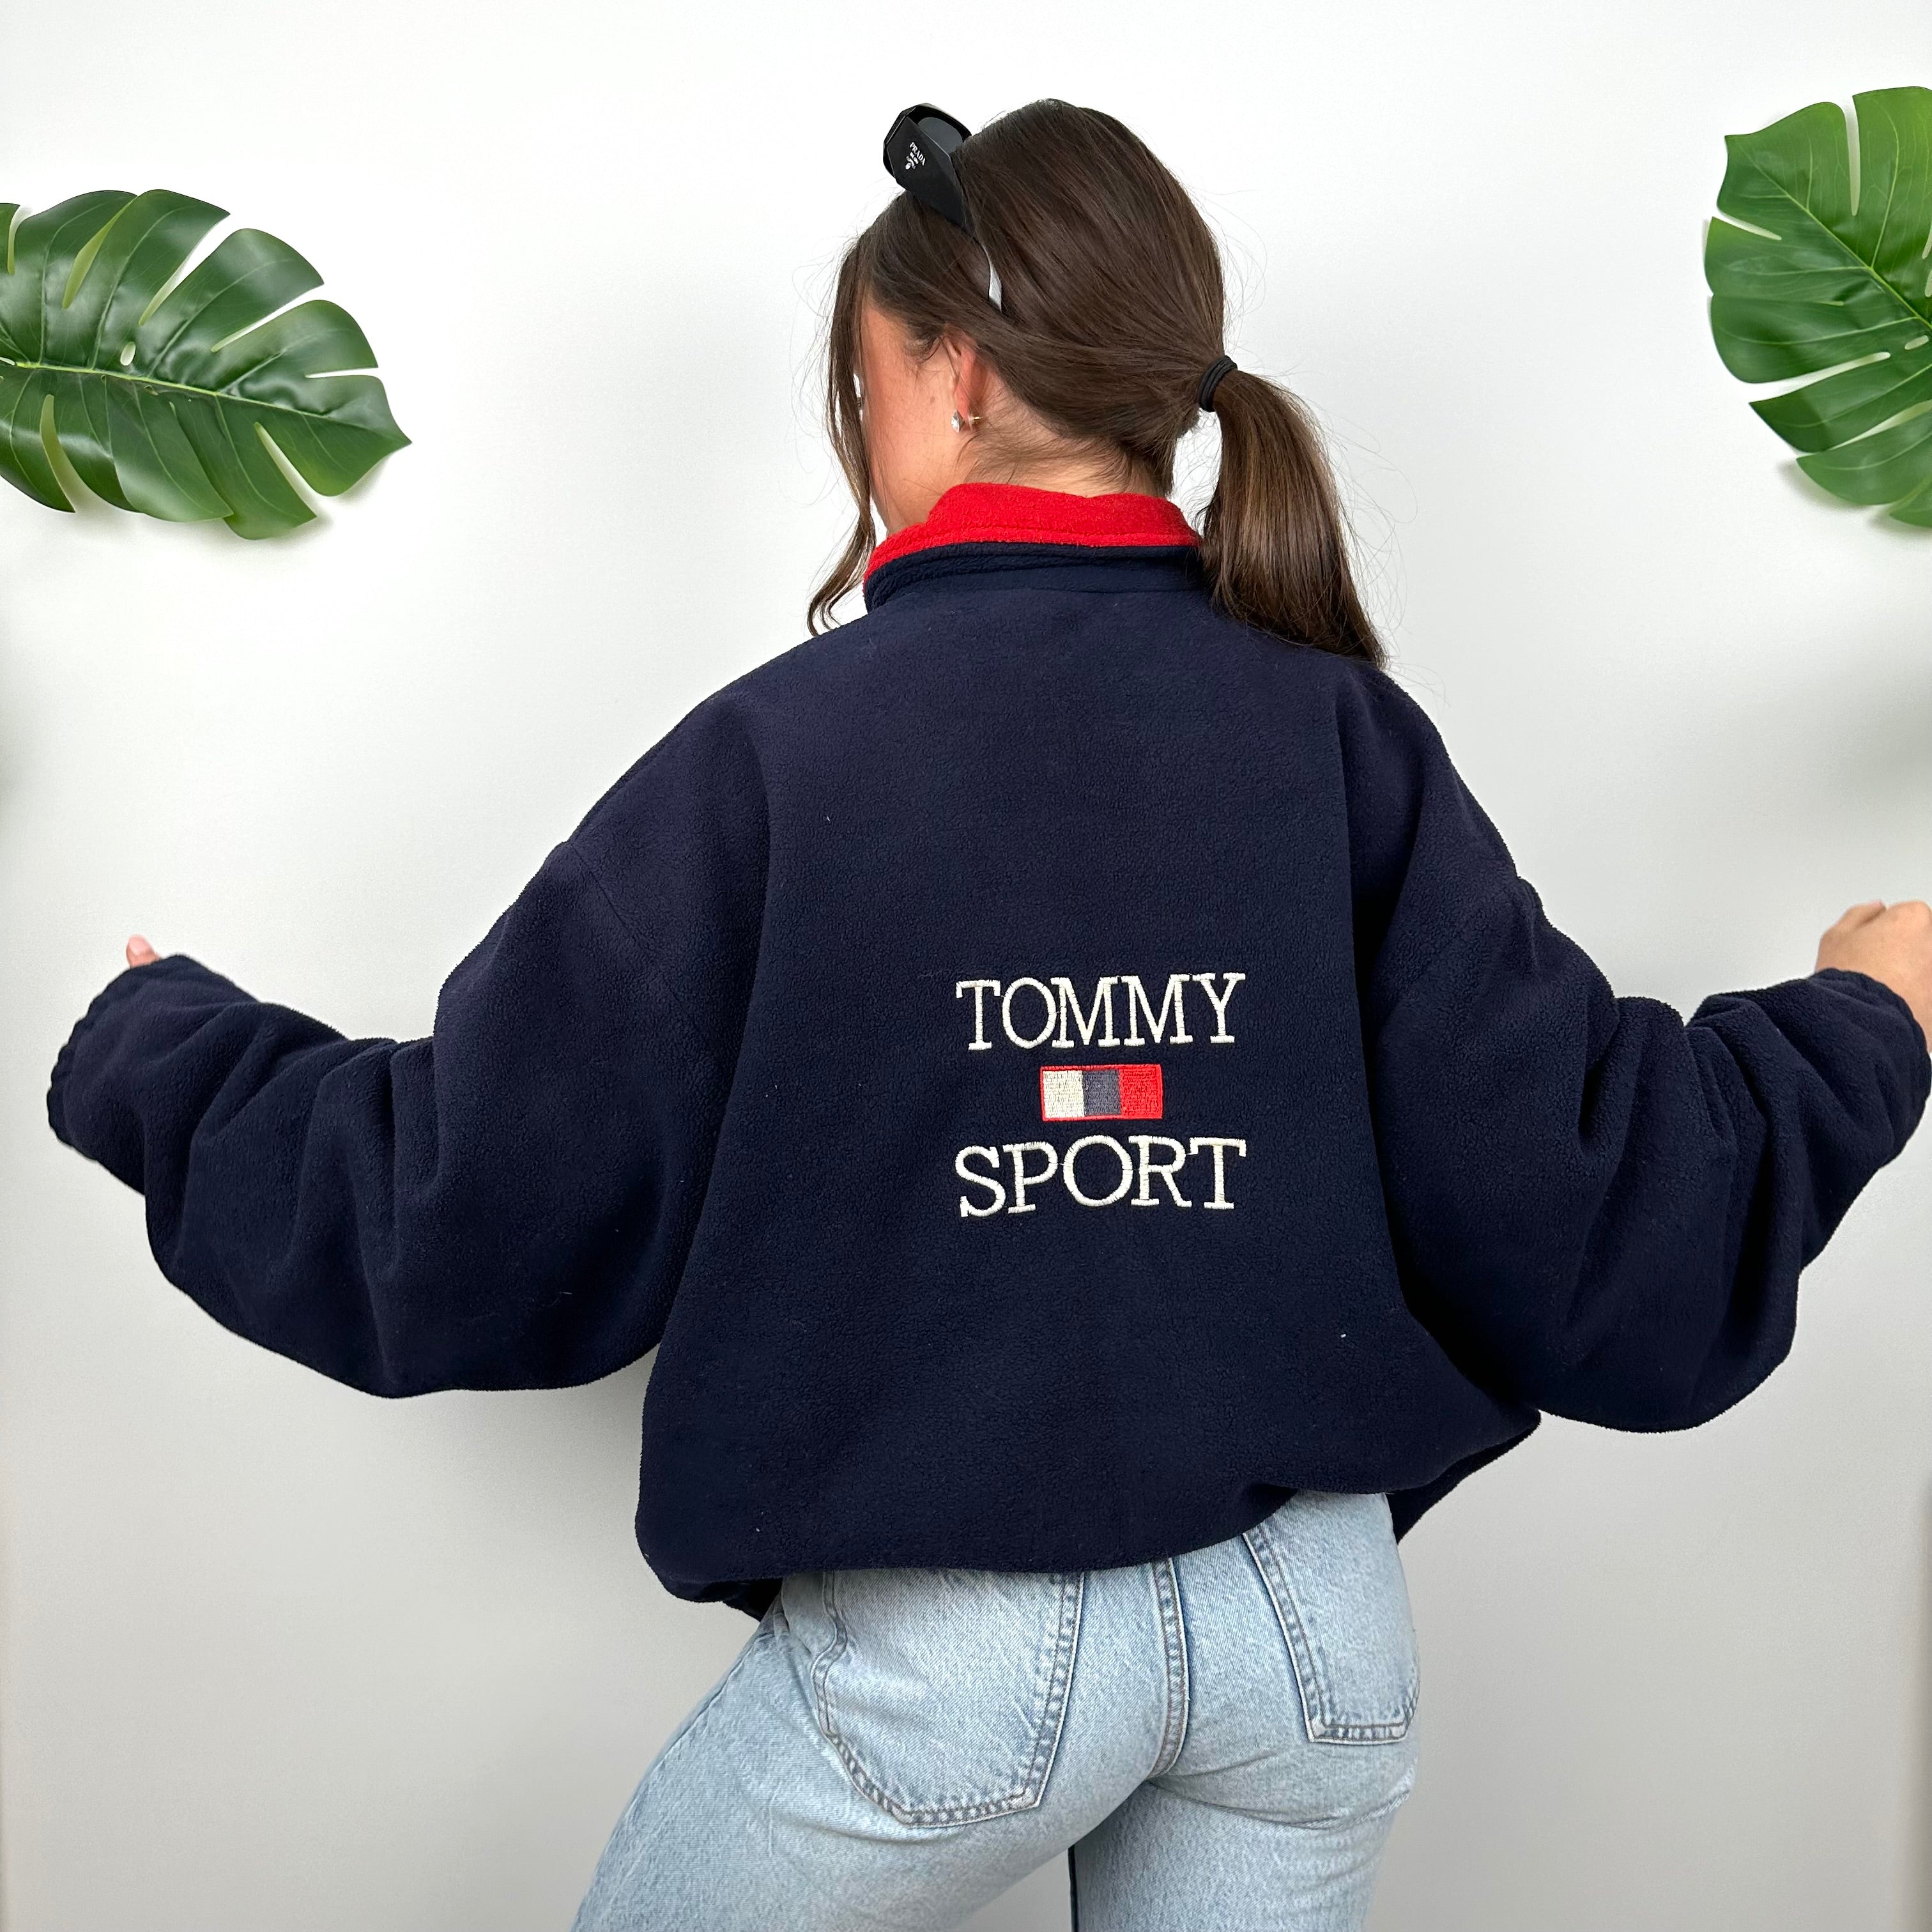 Tommy Hilfiger Embroidered Spell Out Teddy Bear Fleece Zip Up Sweatshirt (L)